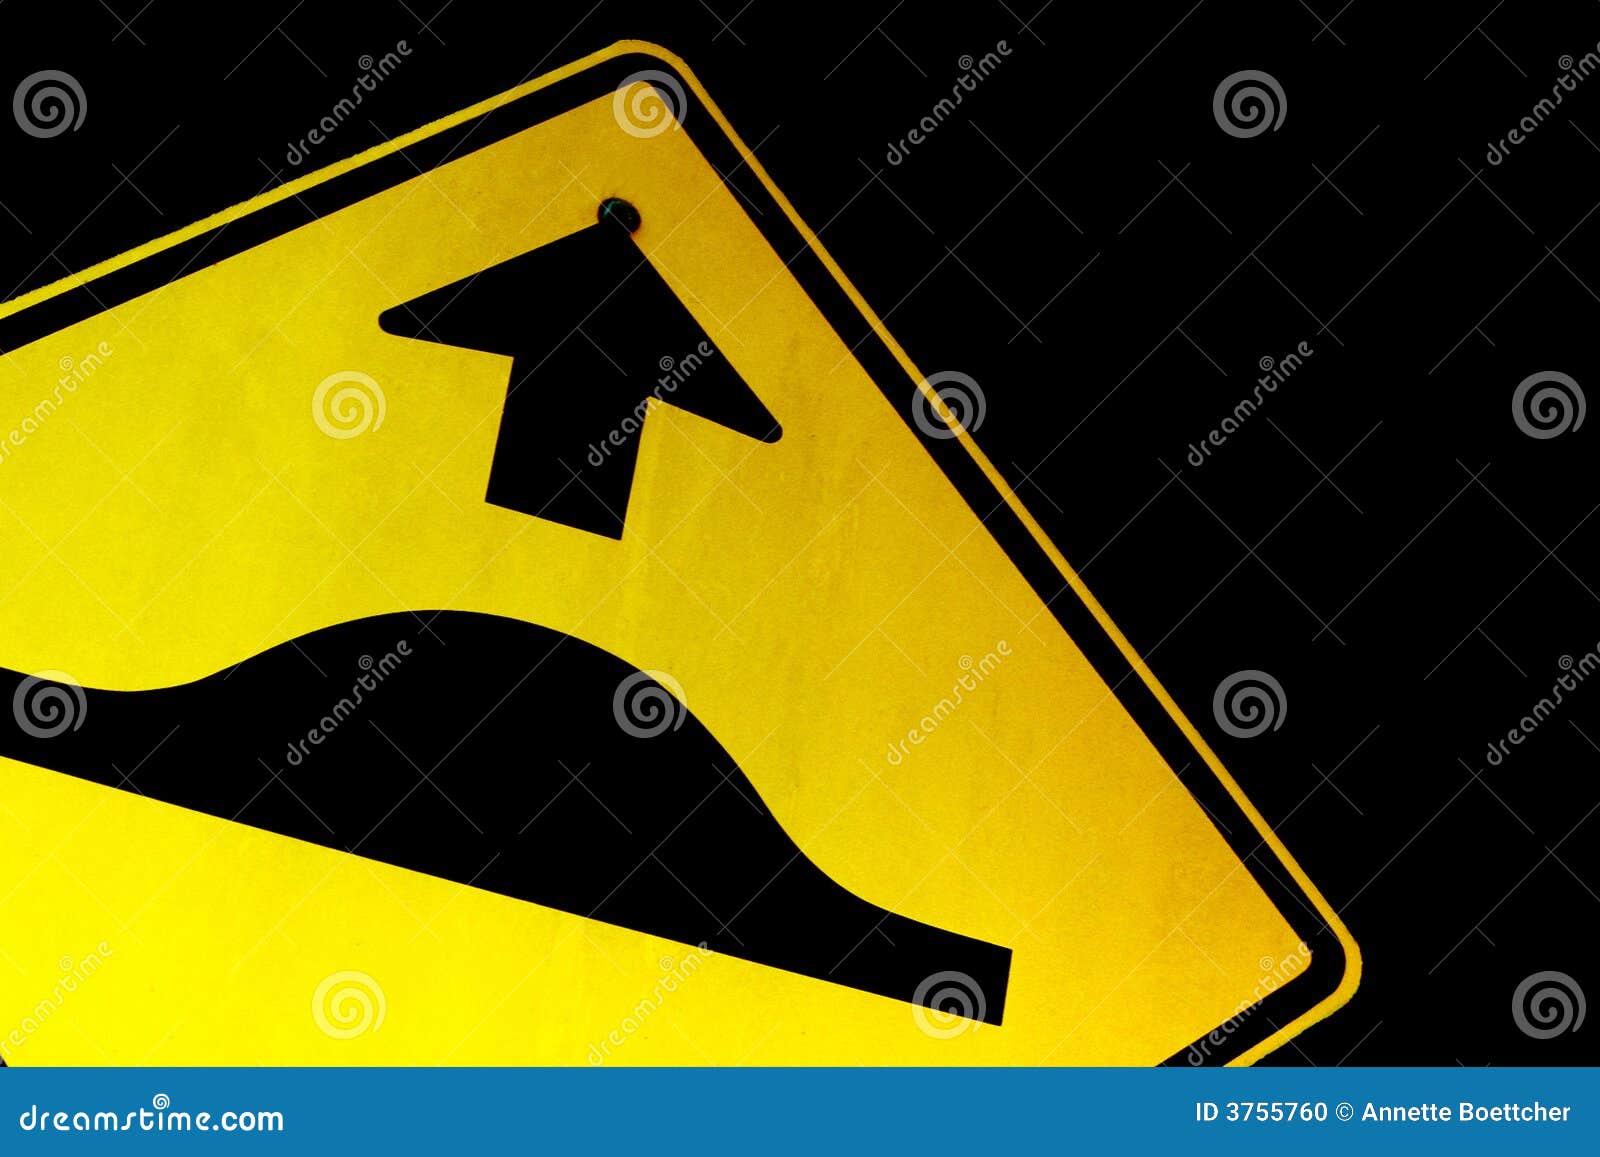 Bumpy Road Ahead Stock Photo Image Of Slowing Hitch